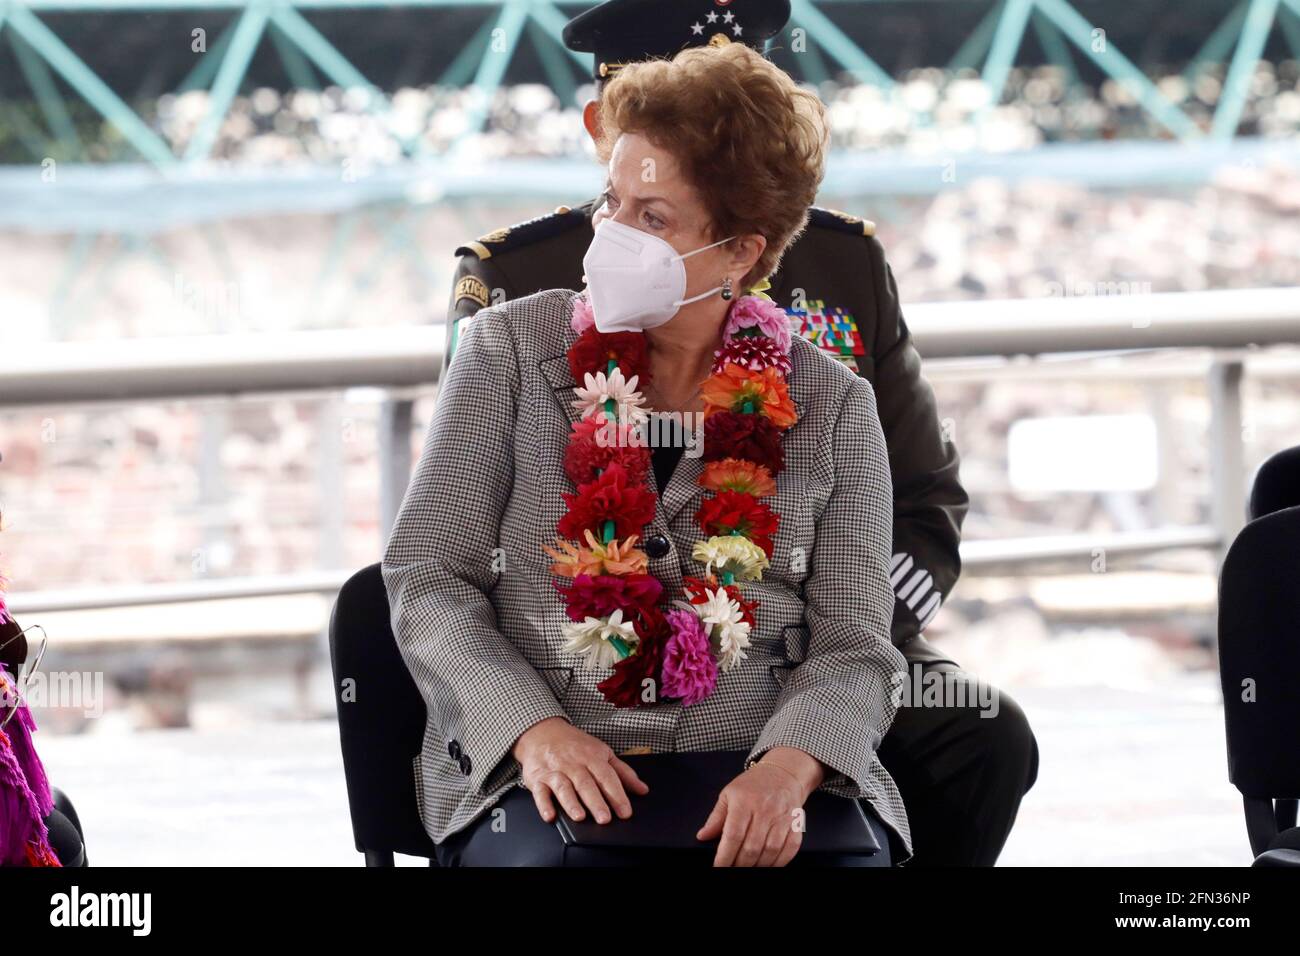 Mexico City, Mexico. 13th May, 2021. MEXICO CITY, MEXICO - MAY 13: Former president of Brazil, Dilma Rousseff, during ceremony for the 700 years of the founding of Tenochtitlan at the Museo del Templo Mayor on May 13, 2021 in Mexico City, Mexico. (Photo by Eyepix/Sipa USA) Credit: Sipa USA/Alamy Live News Stock Photo